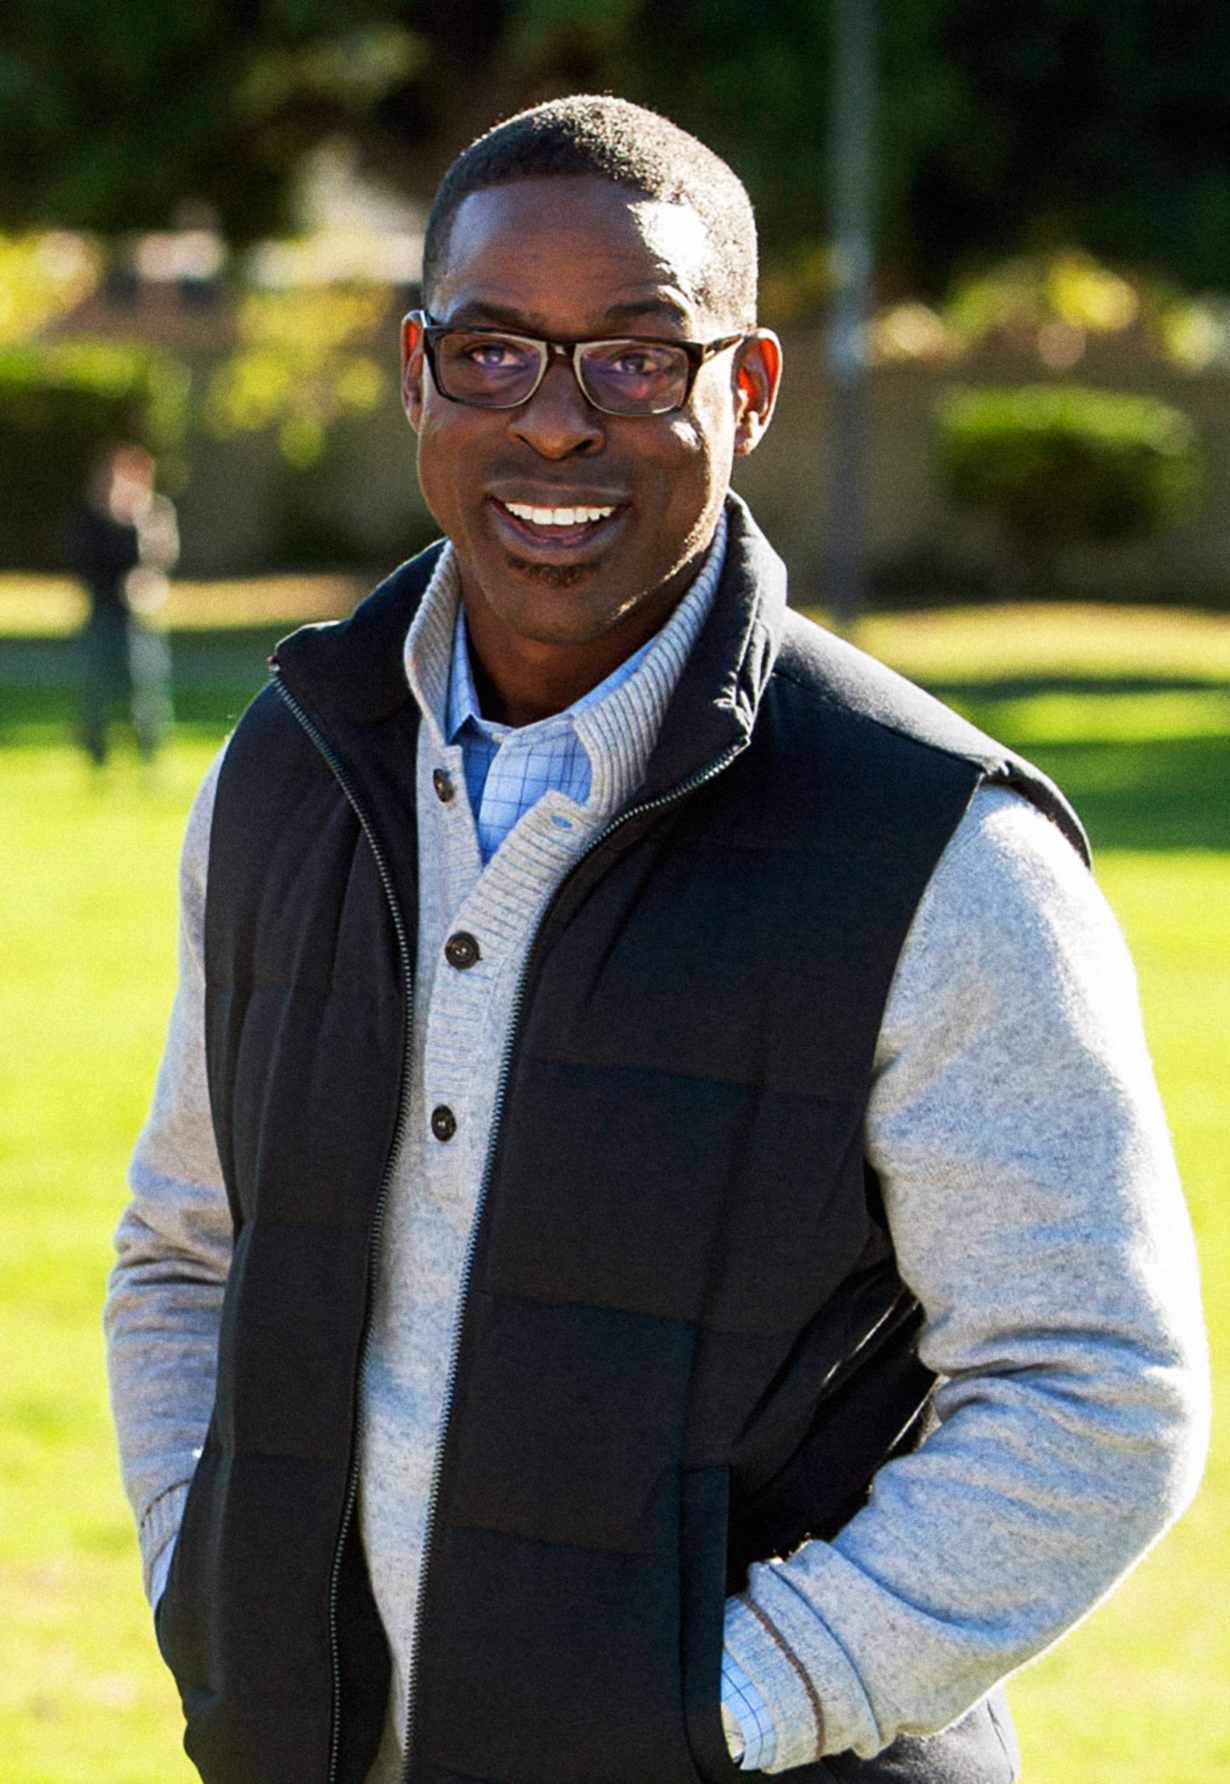 closeup of him wearing glasses and a vest over a sweater as he stands outside